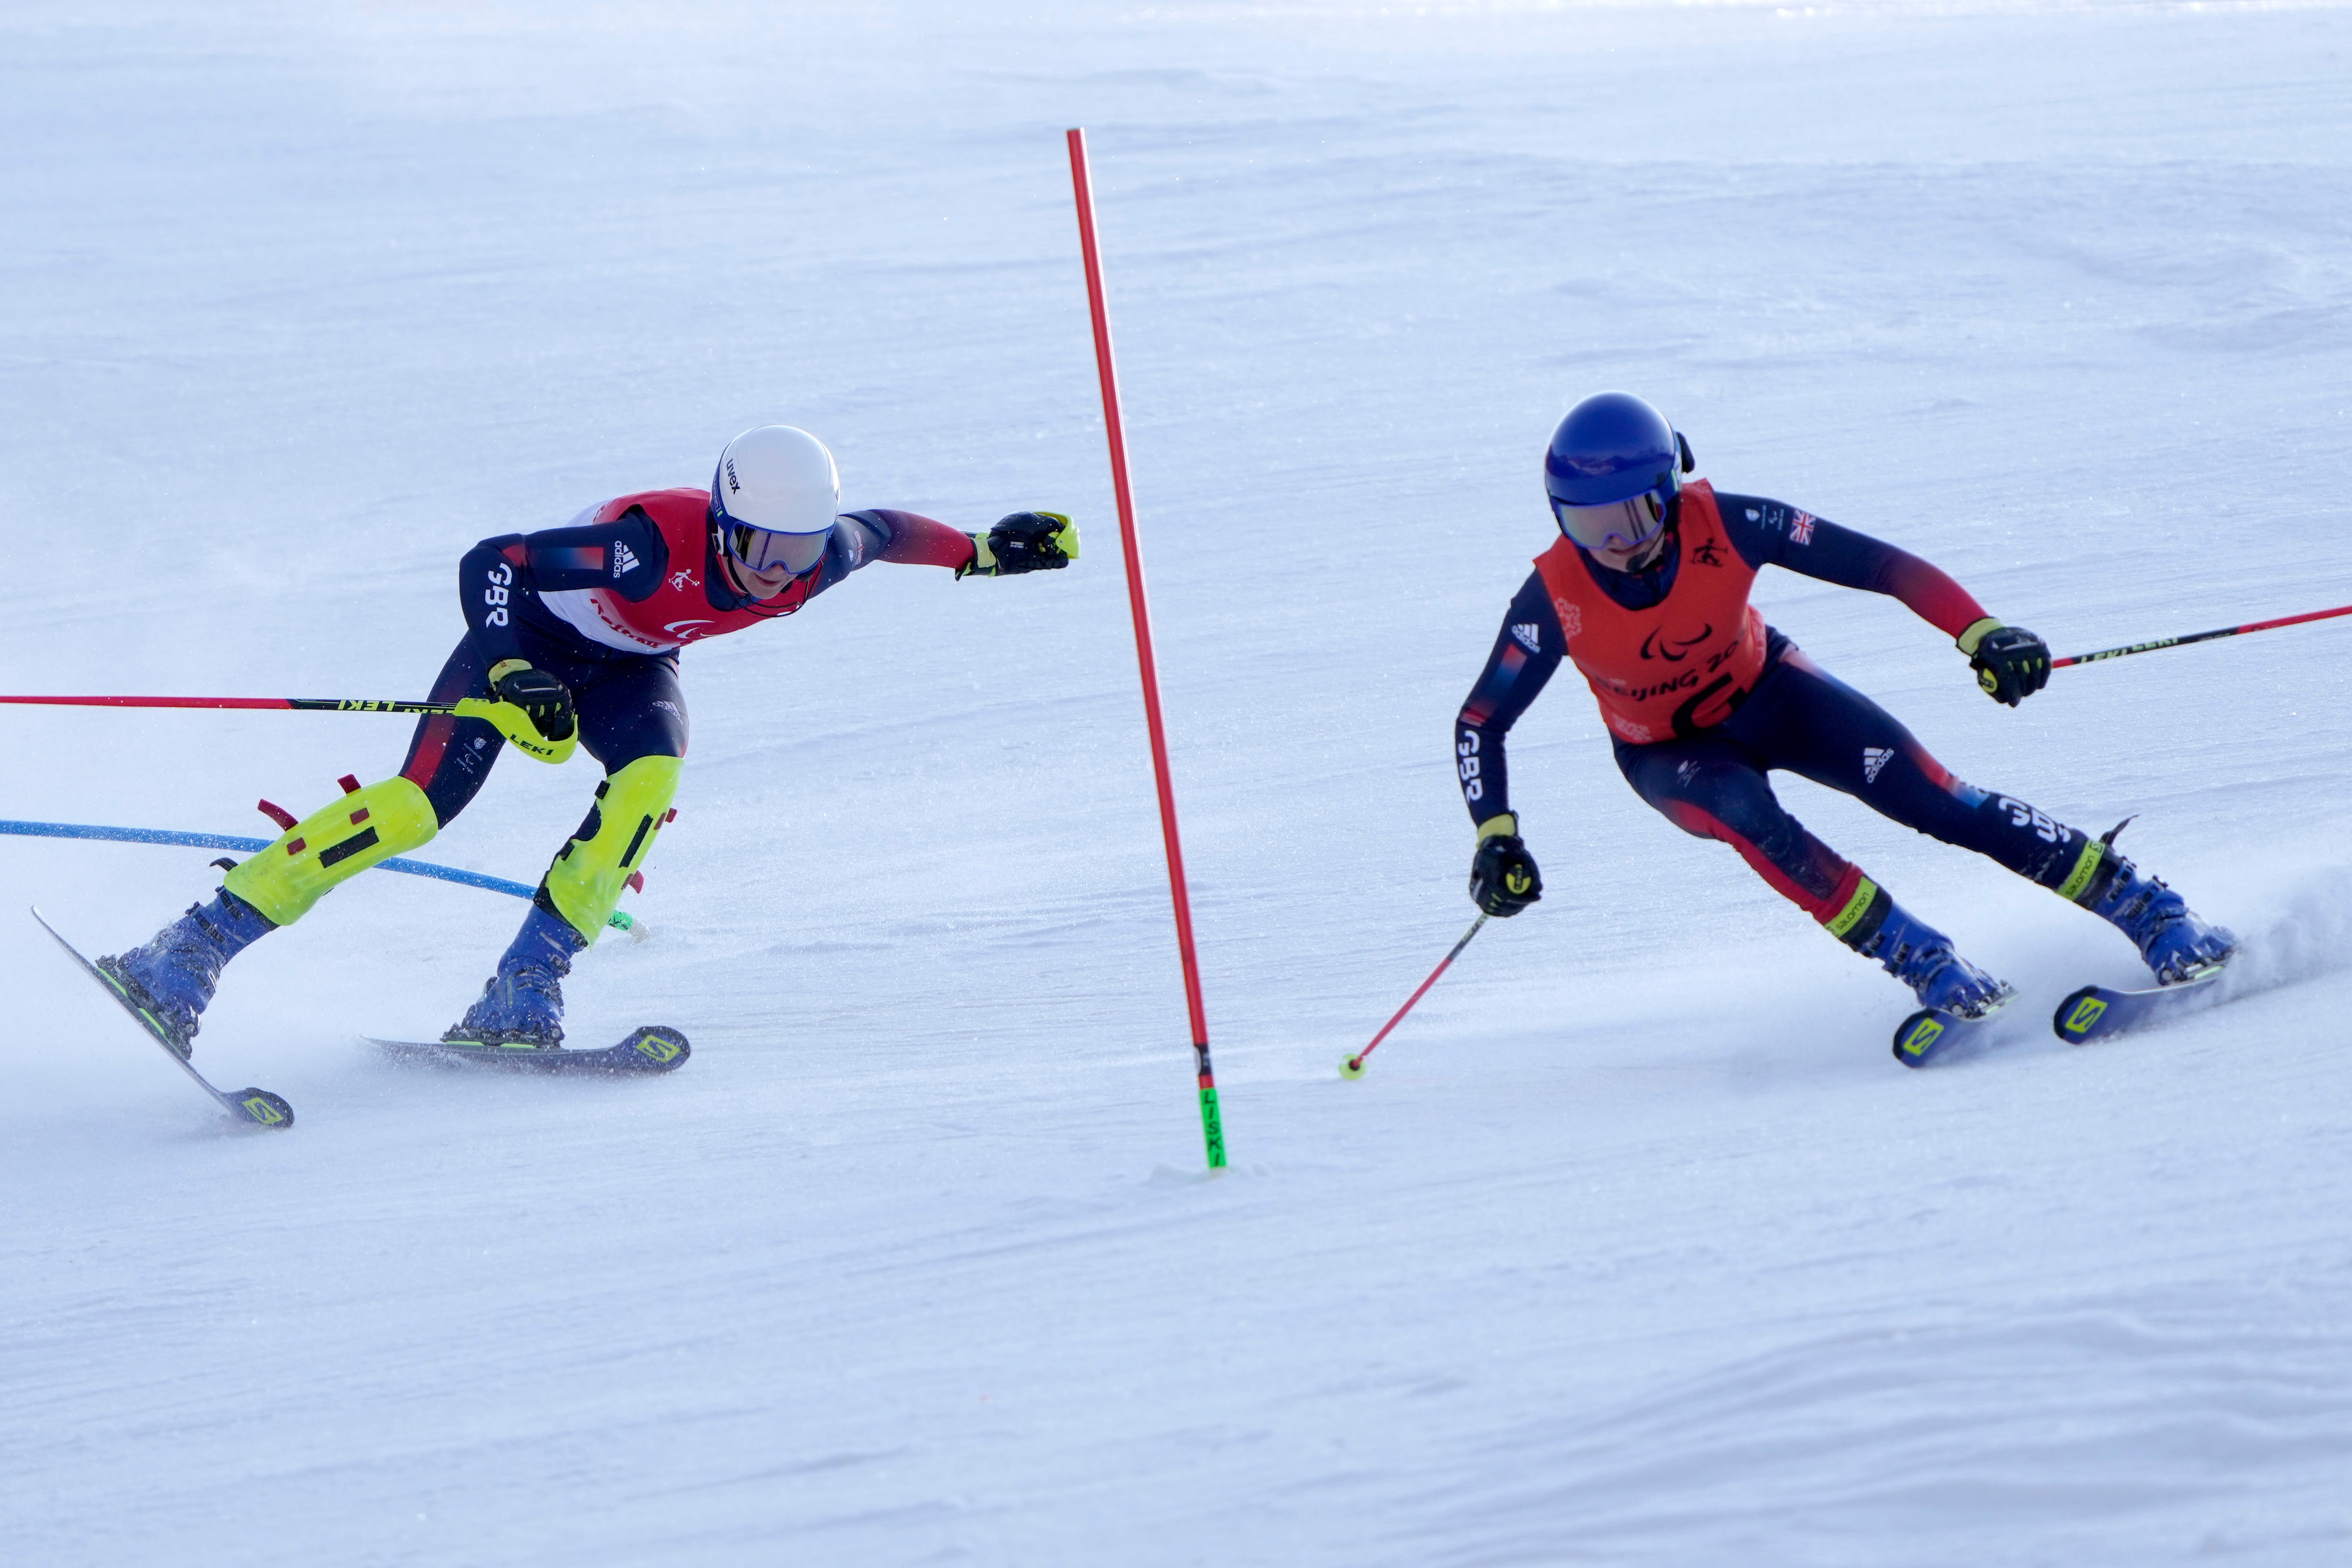 Neil Simpson (left), Great Britain’s only gold medallist at the Paralympics, was again in action in the slalom on the final day of competition in Beijing before carrying the nation’s flag at the closing ceremony (Andy Wong/AP)